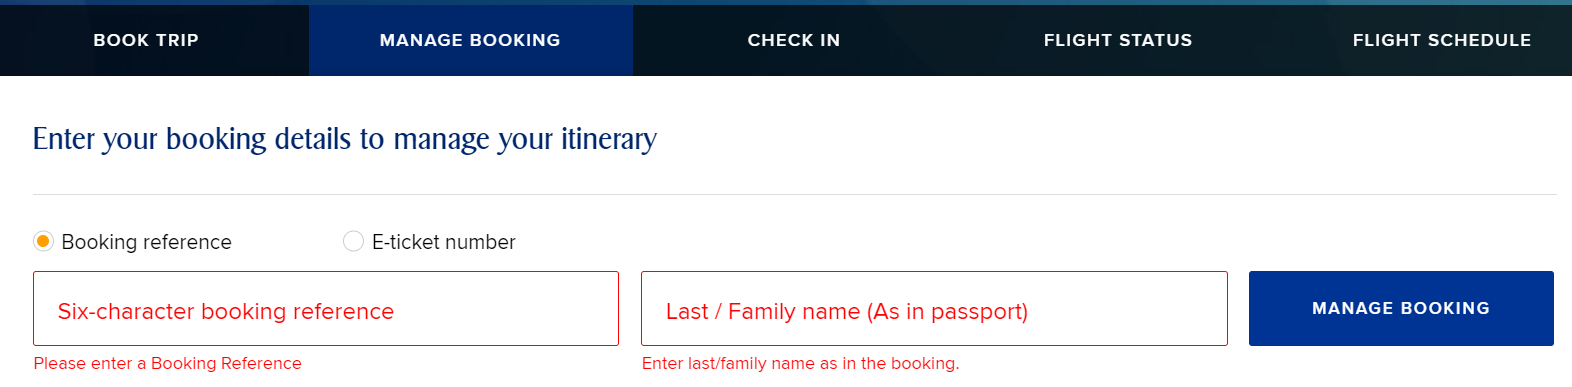 Singapore Airline Manage Booking tab